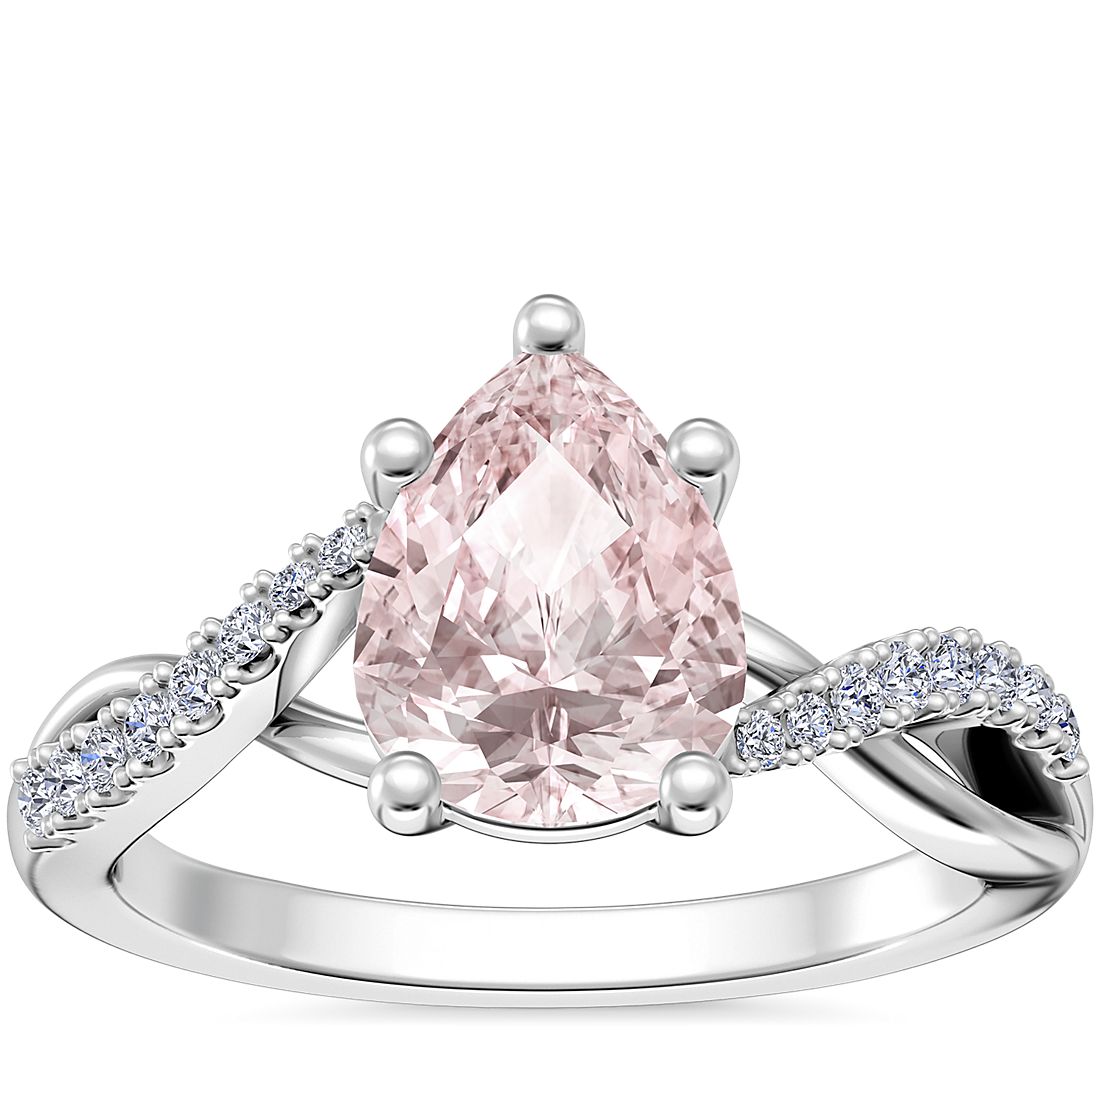 Classic Petite Twist Diamond Engagement Ring with Pear-Shaped Morganite in 14k White Gold (8x6mm)